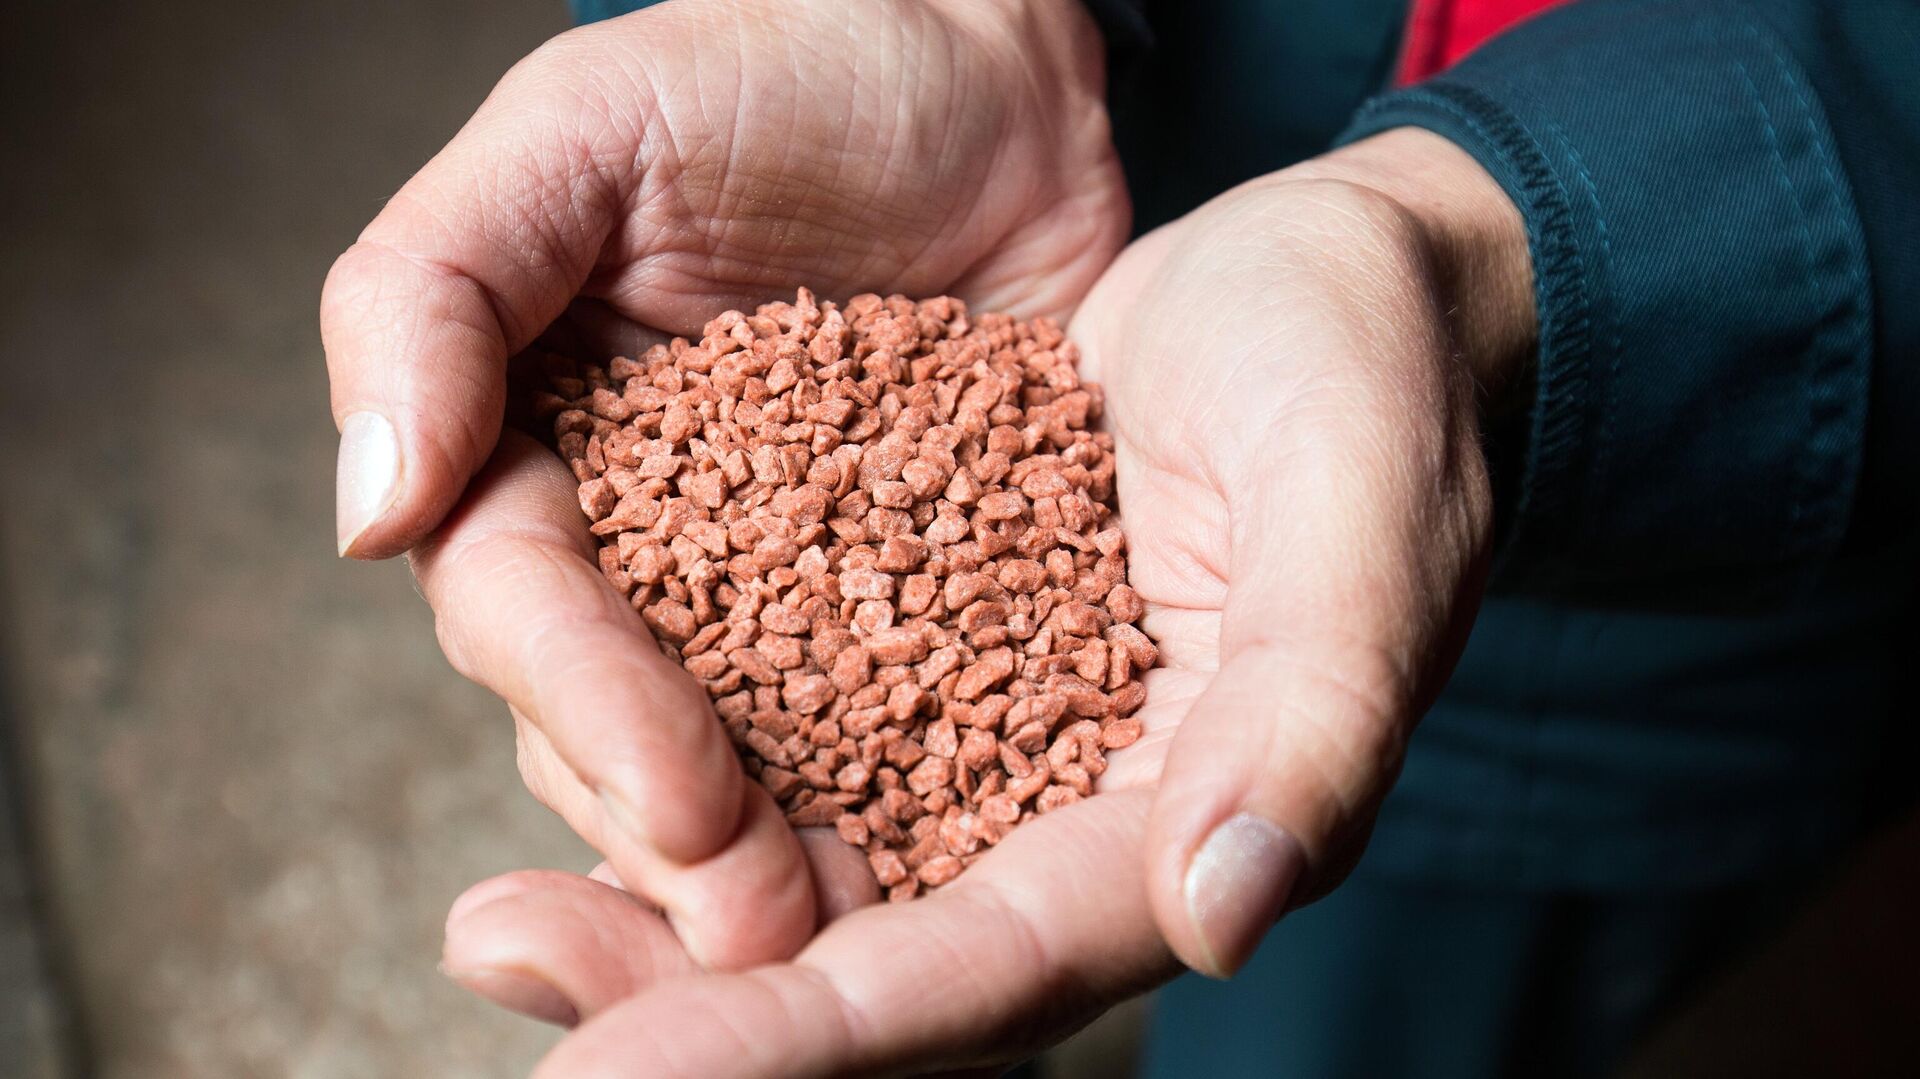 Poland more than triples imports of fertilizers from Russia